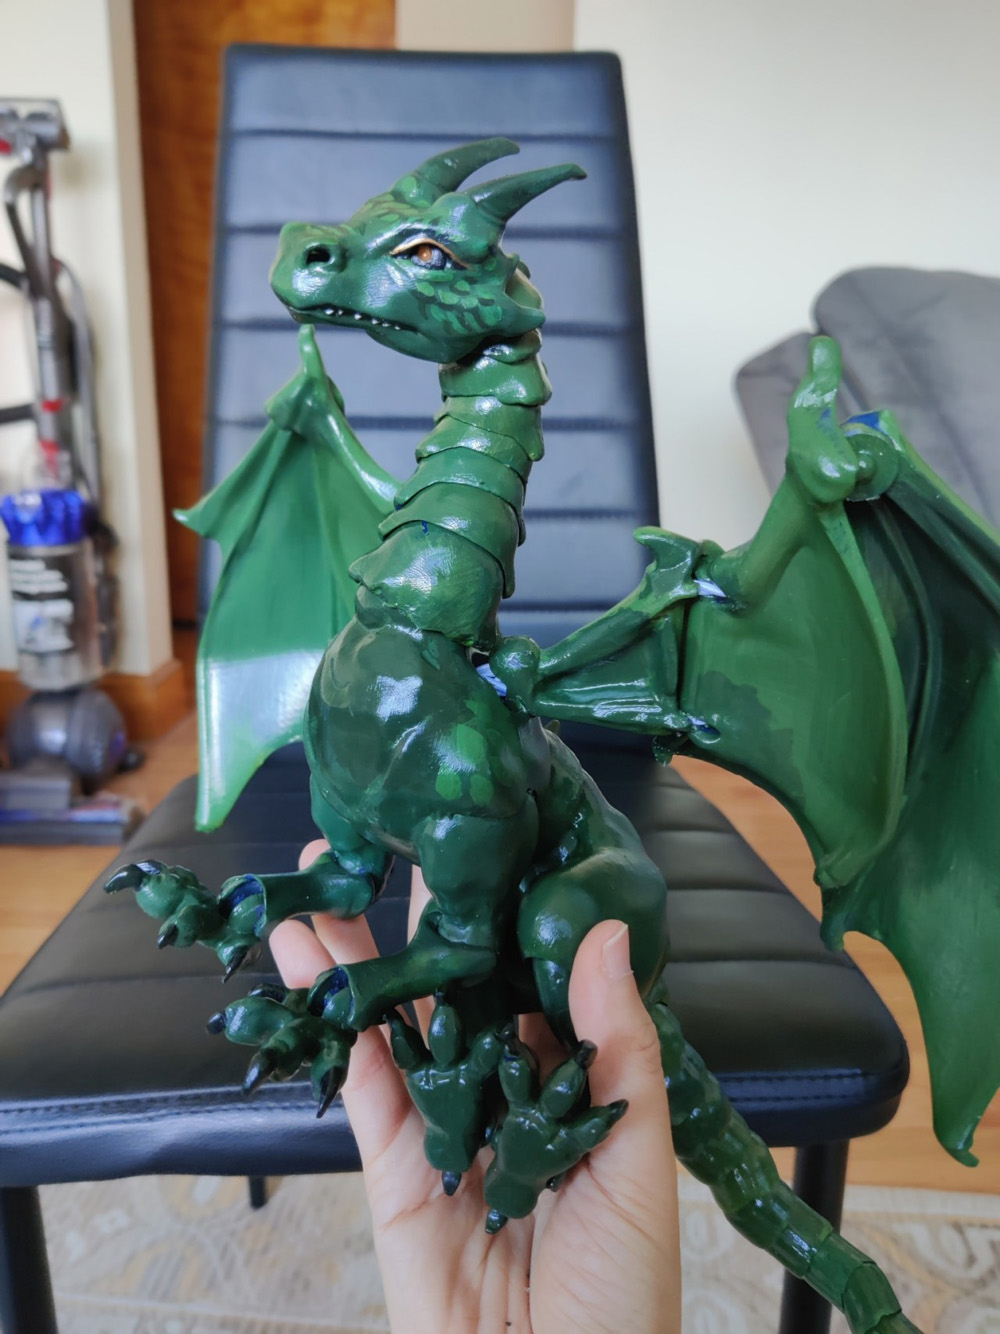 A green ball jointed dragon